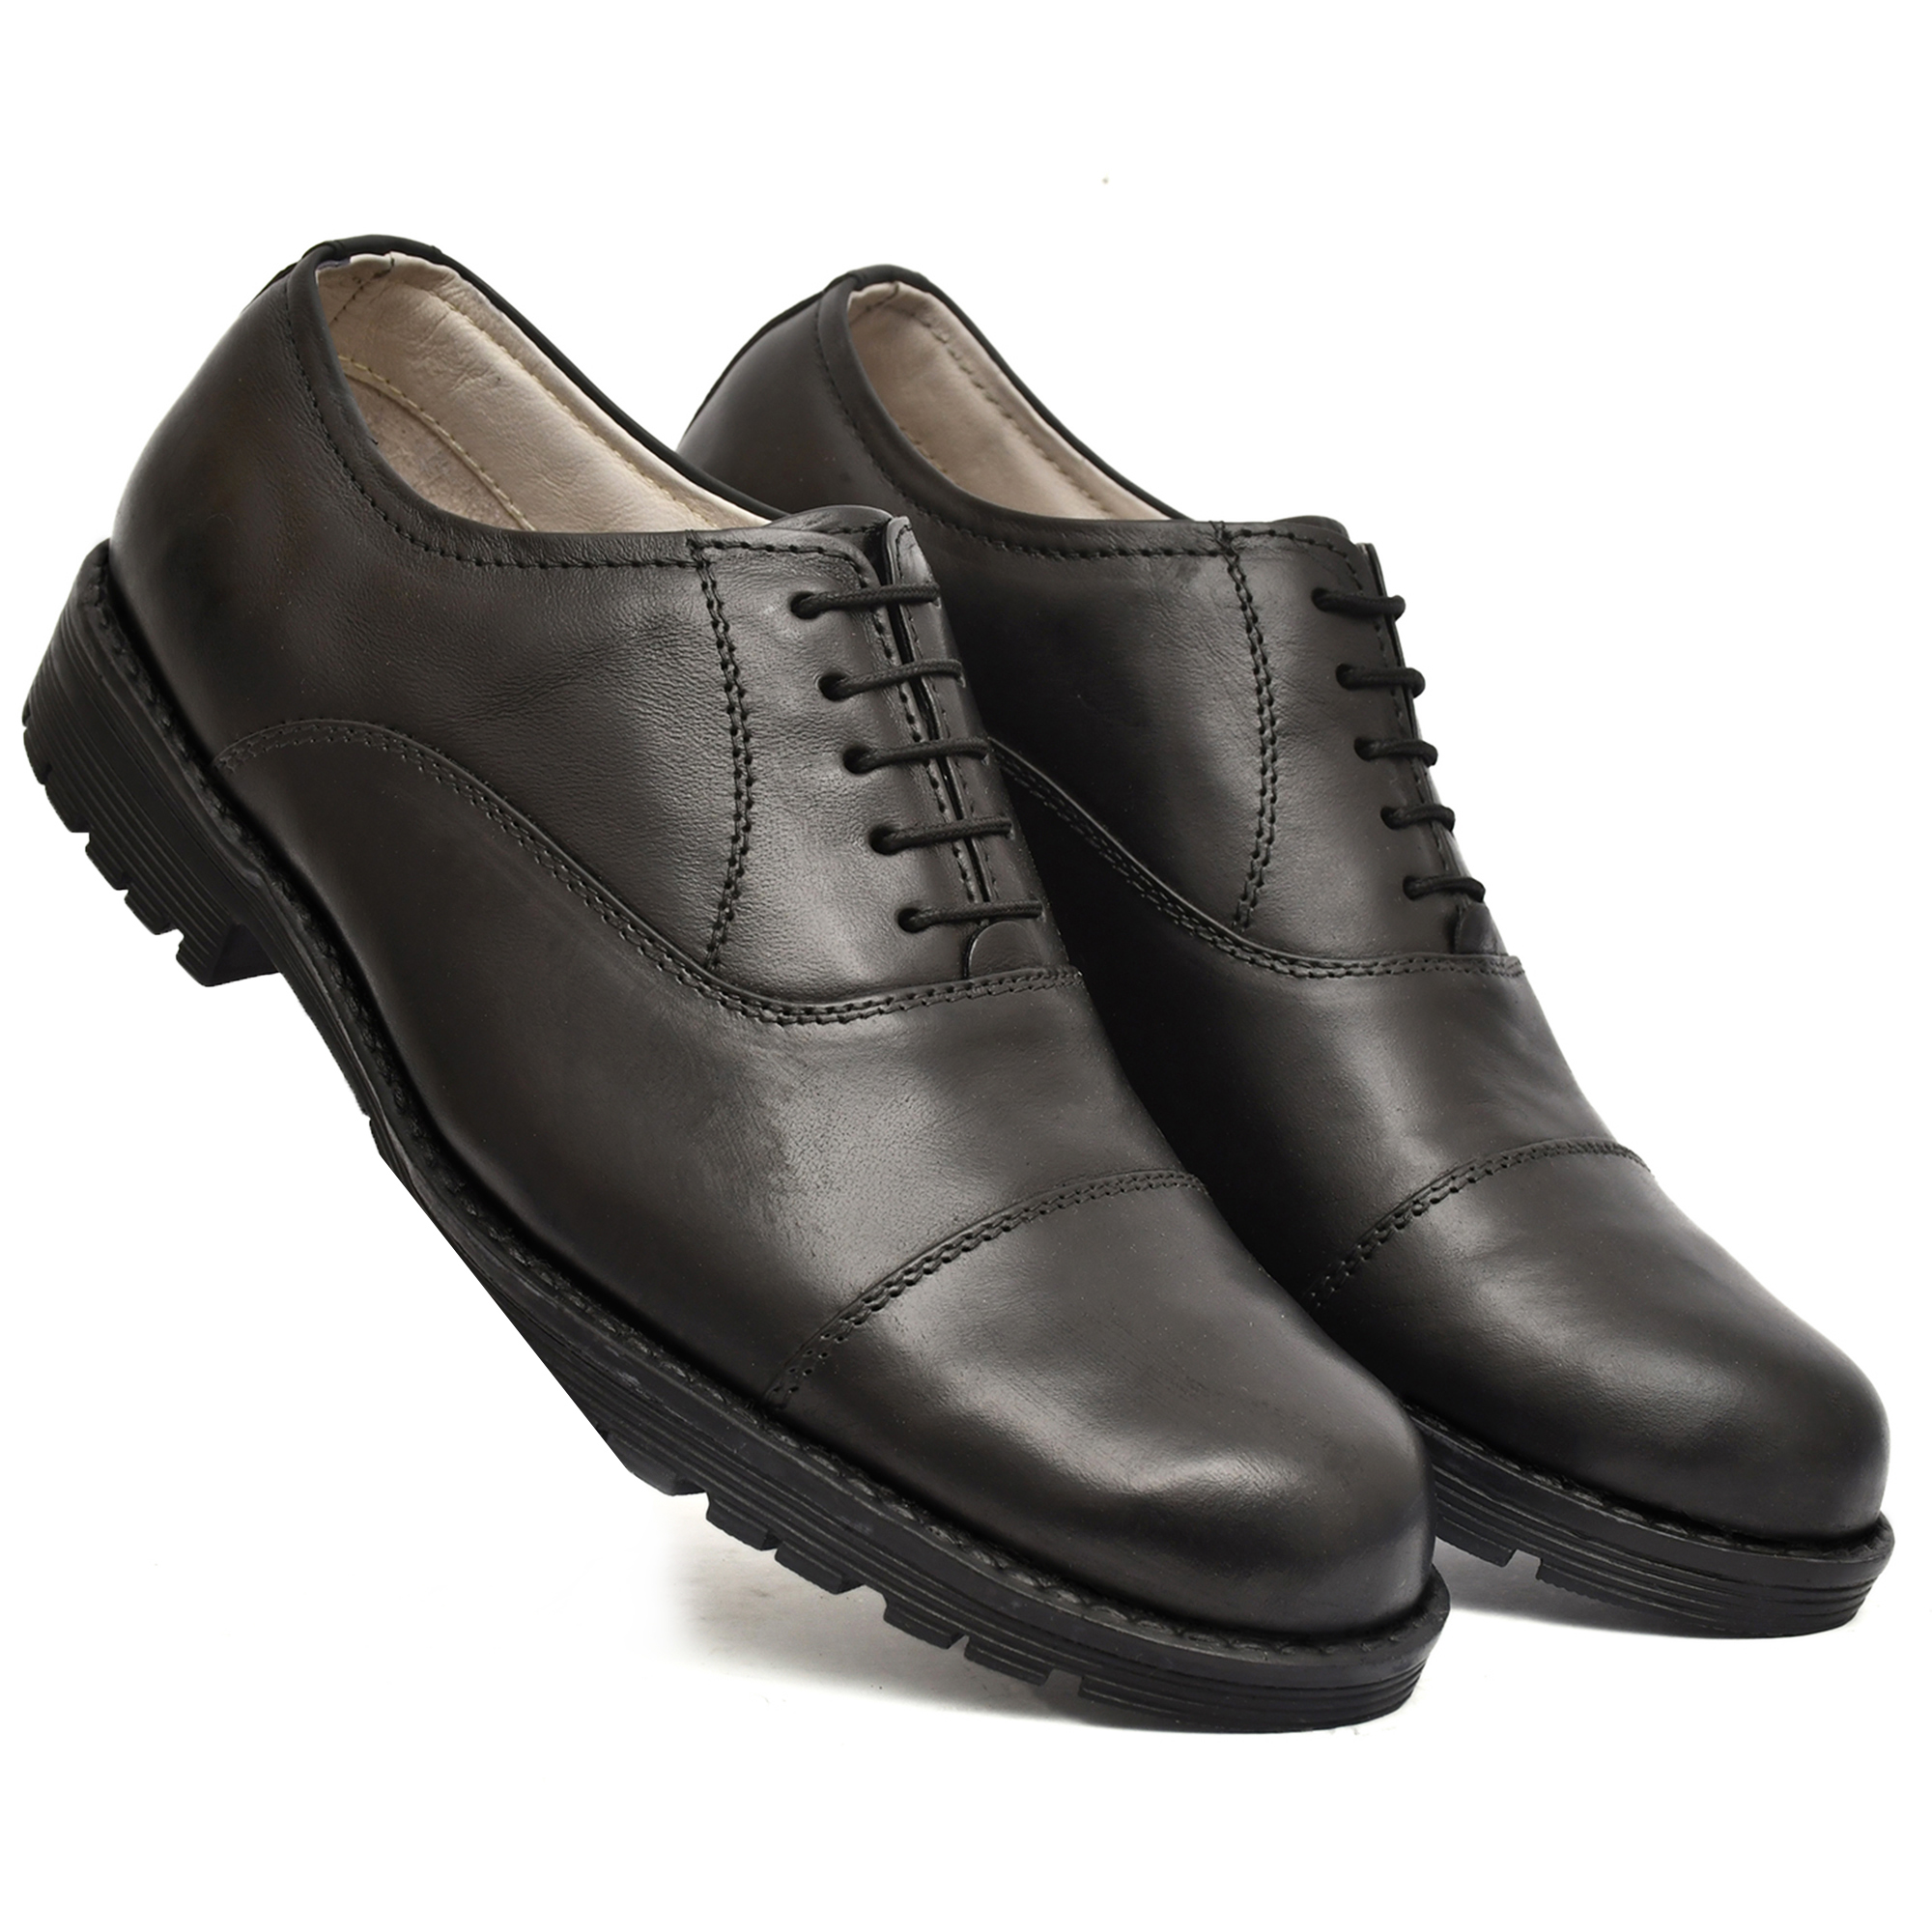 Safety Shoes: Buy Industrial Safety formal Black Leather Oxford Shoes Online. Article: S110-Black